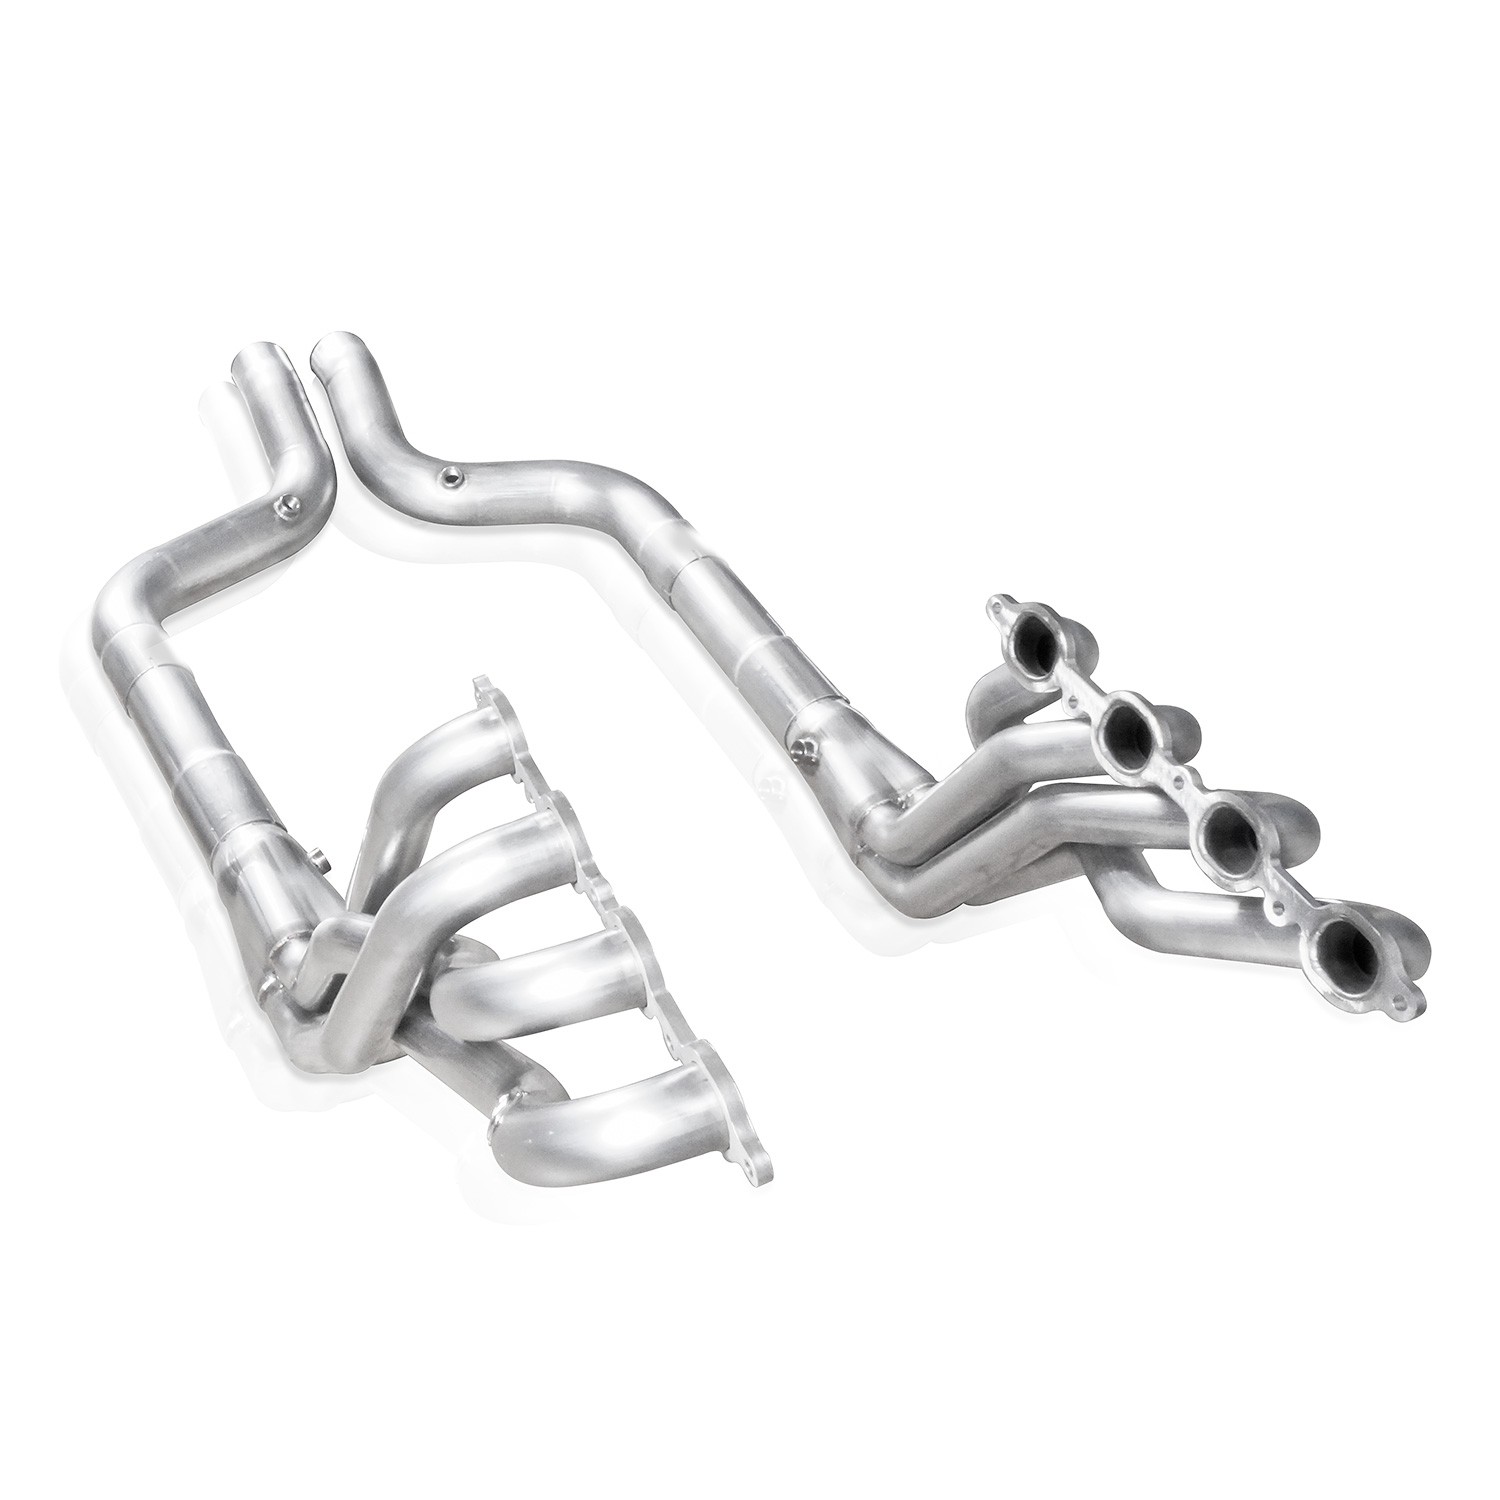 2016+ Camaro SS Stainless Works 1 7/8" Long Tube Headers with Offroad Pipes - Performance Connect